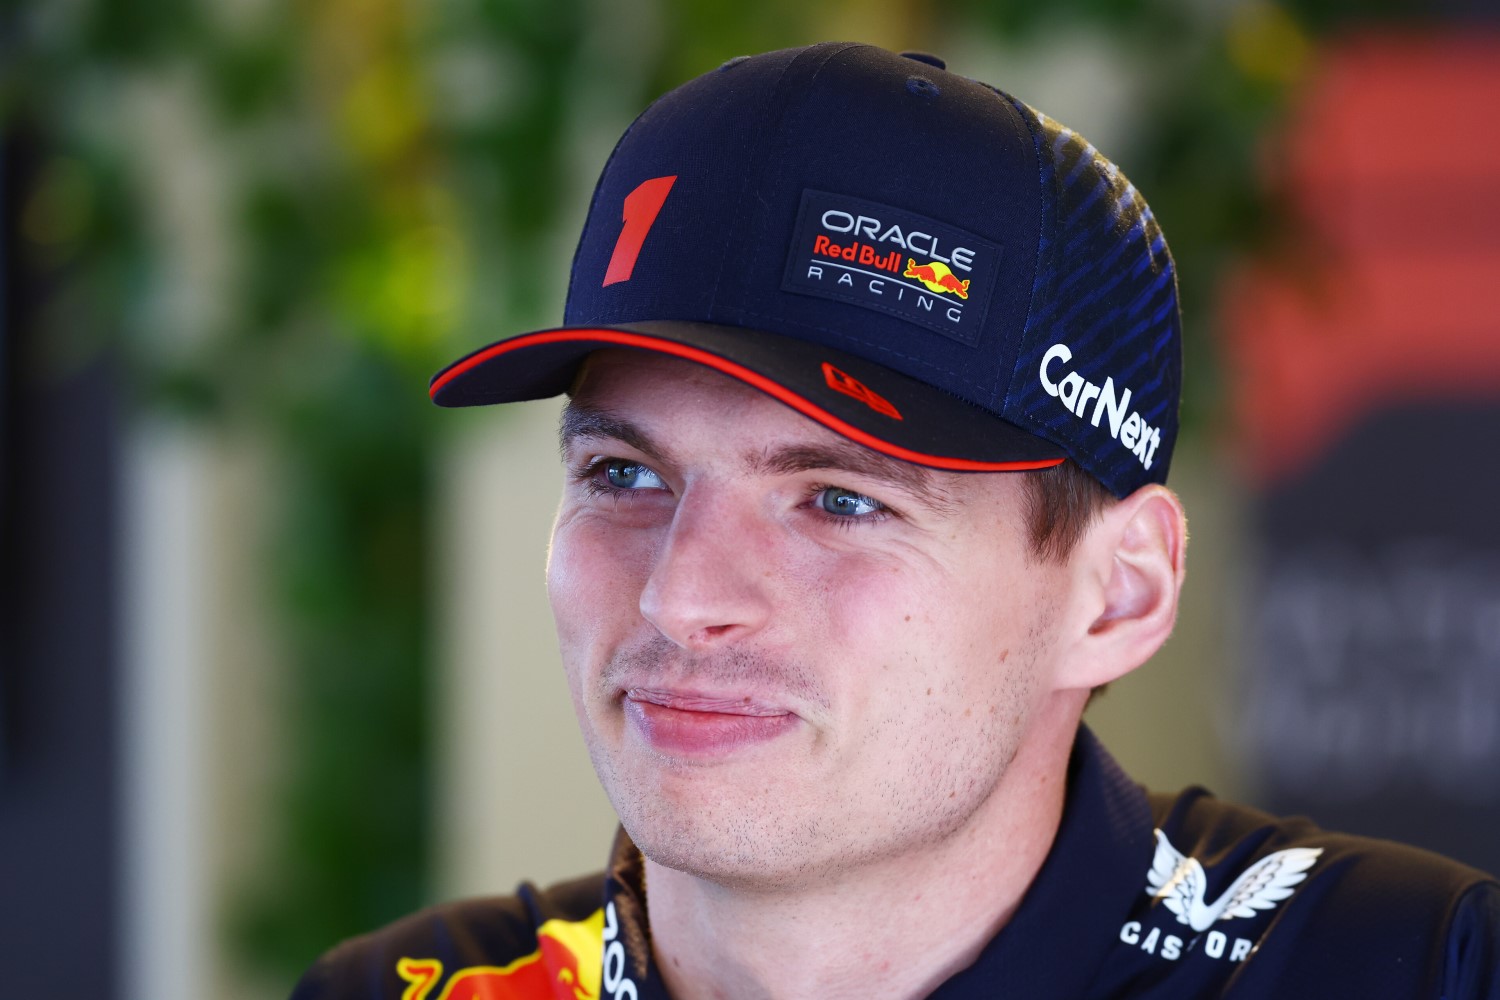 Max Verstappen of the Netherlands and Oracle Red Bull Racing looks on in the Paddock prior to practice ahead of the F1 Grand Prix of Saudi Arabia at Jeddah Corniche Circuit on March 17, 2023 in Jeddah, Saudi Arabia. (Photo by Mark Thompson/Getty Images) // Getty Images / Red Bull Content Pool